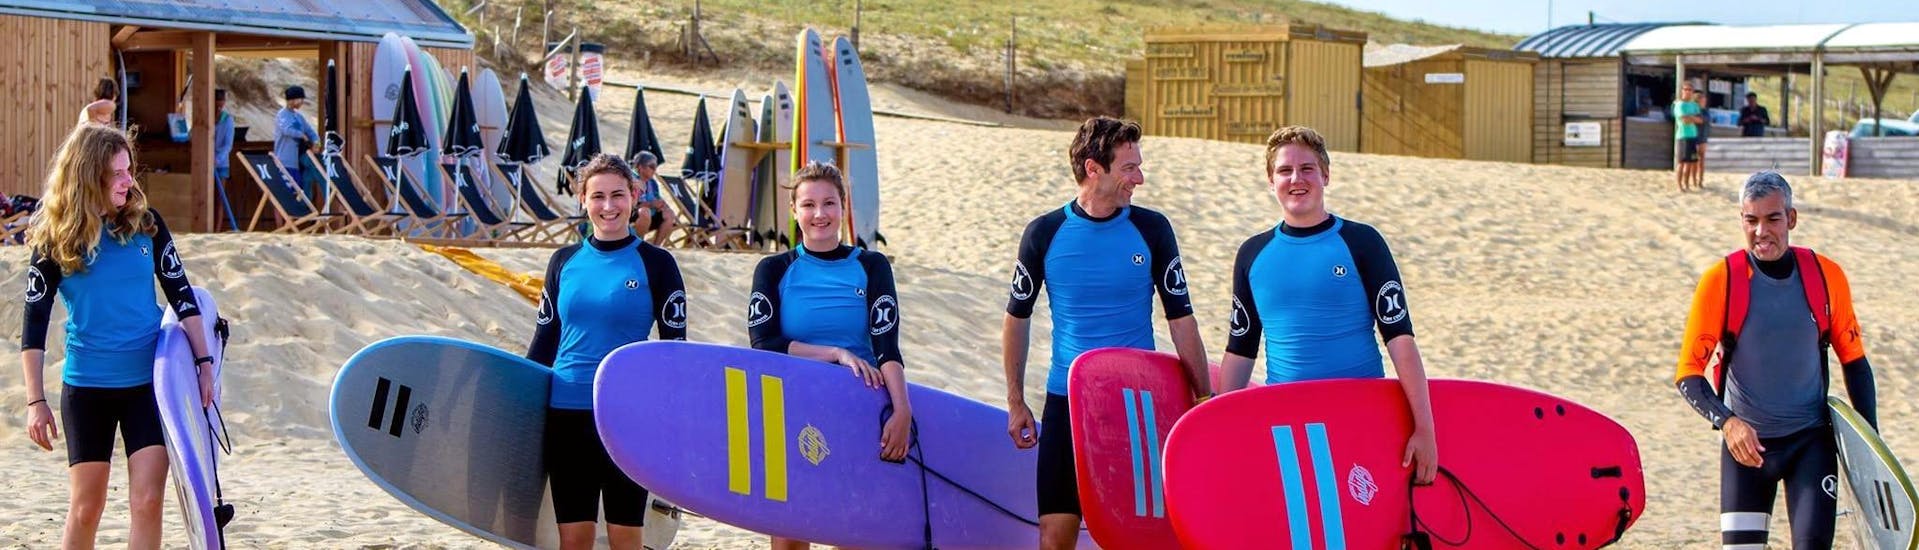 A group of surfers is heading to the water with their board under their arms for their Surfing Lessons - Culs Nus Beach - All Levels with Hossegor Surf Center.